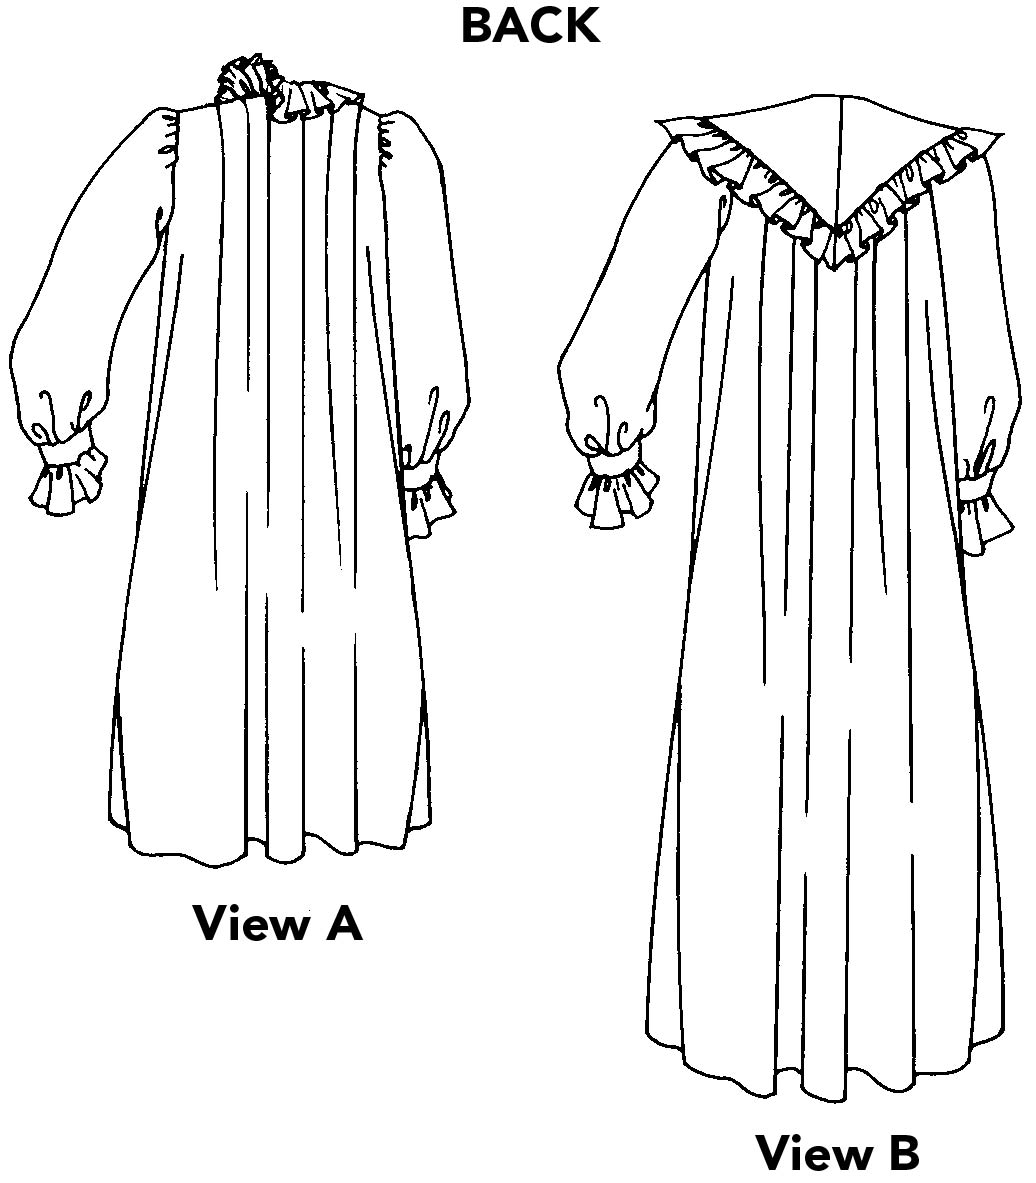 line drawings of back of both gown views